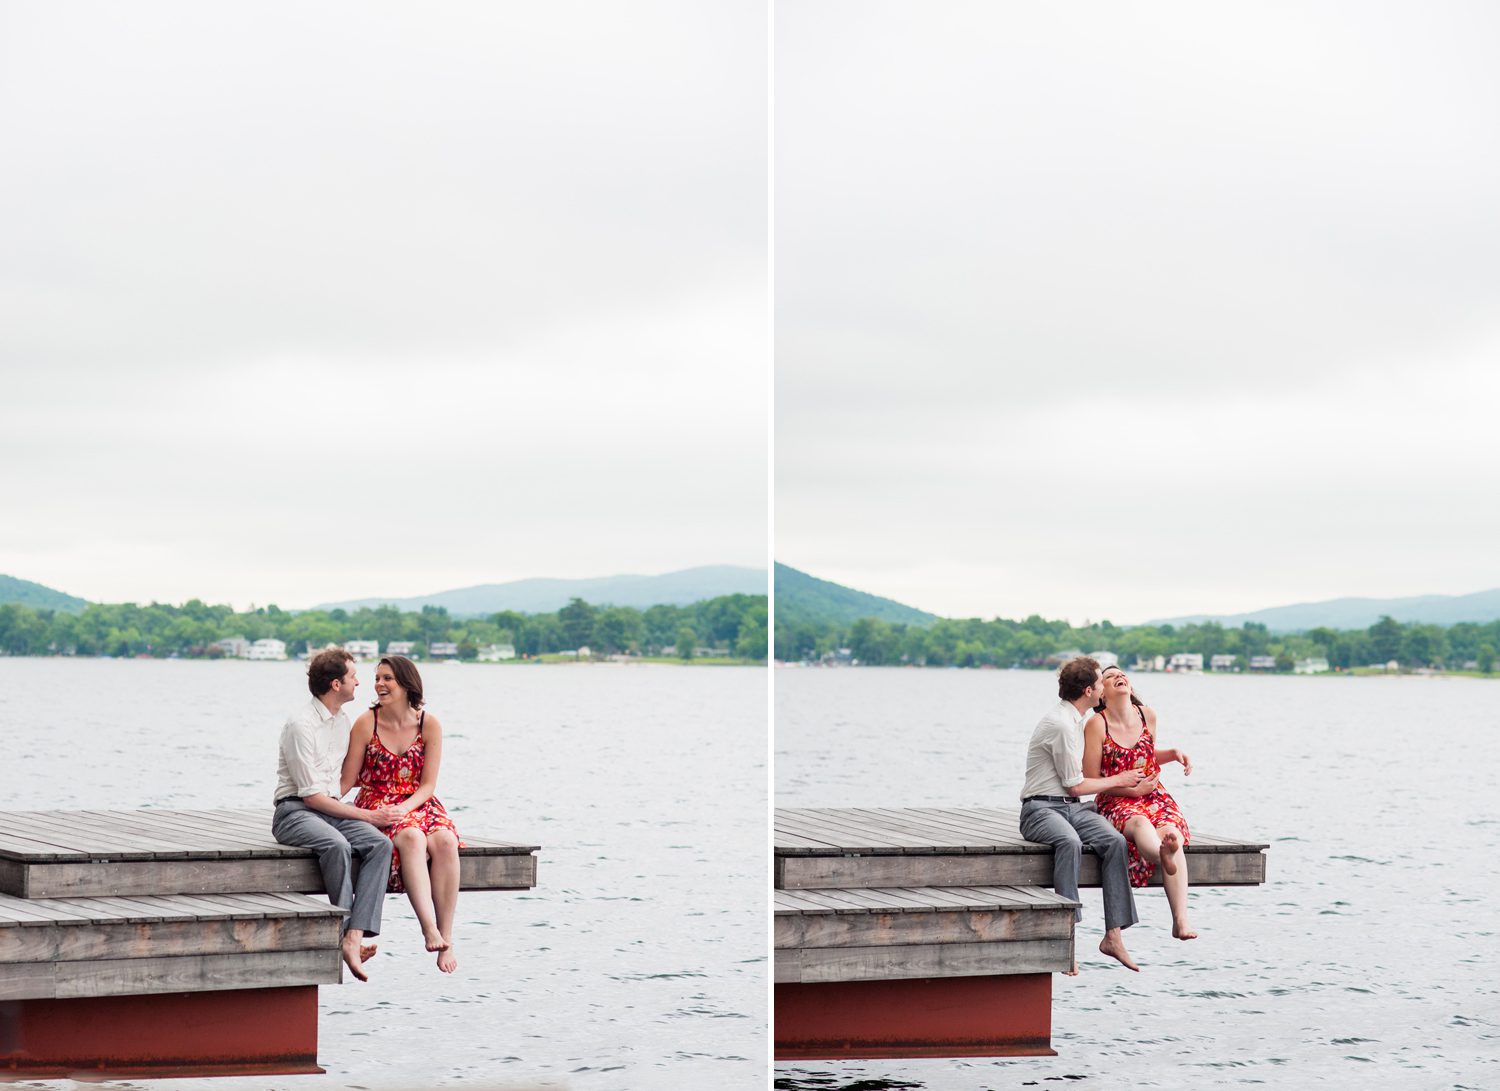 Engagement on a Lake in New York